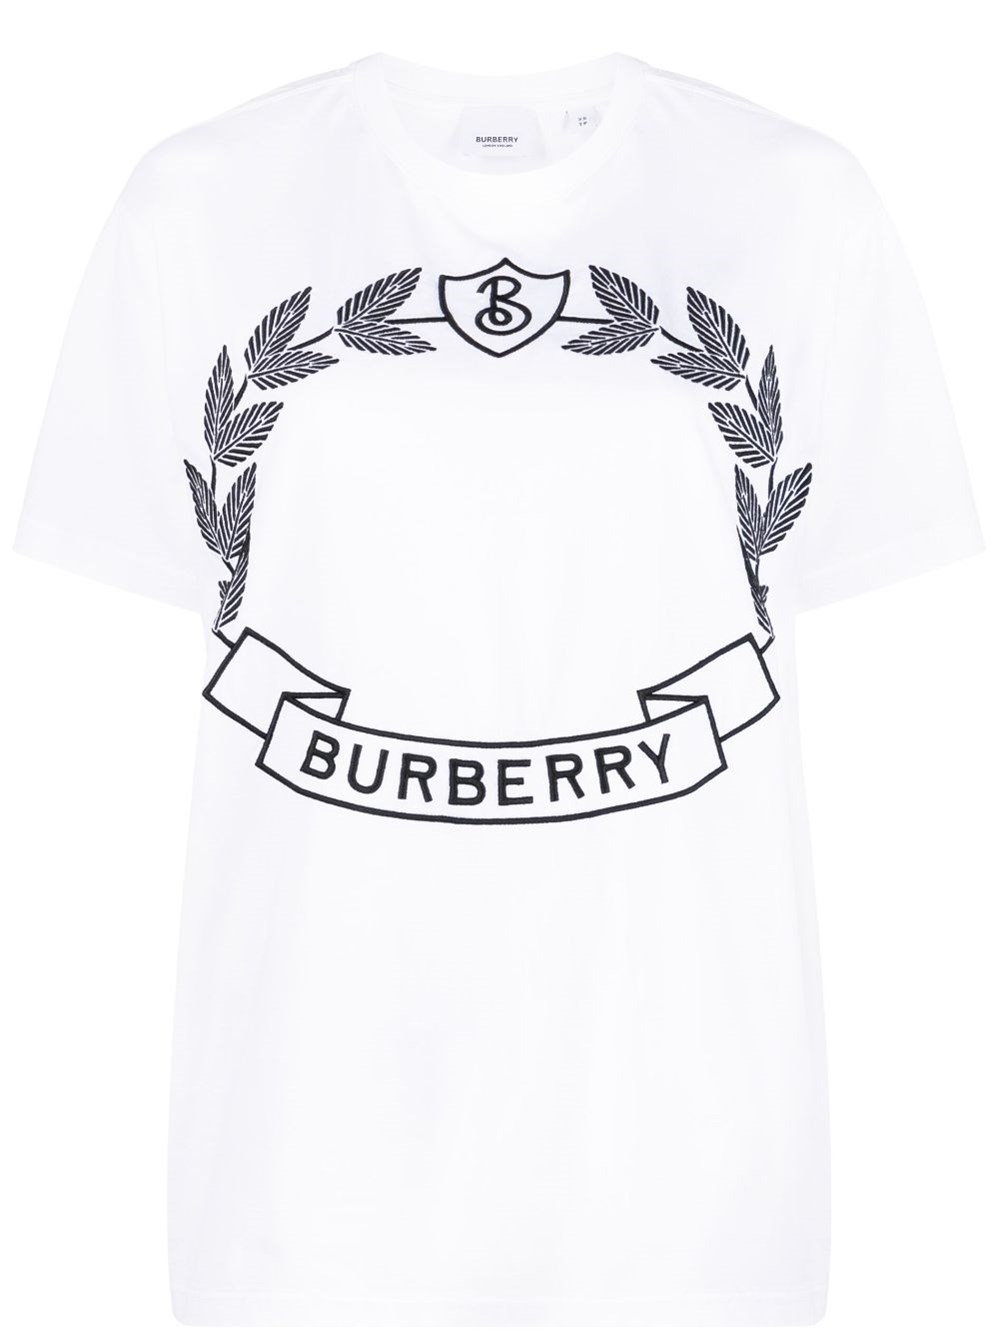 burberry CARRICK T-SHIRT available on montiboutique.com - 55263